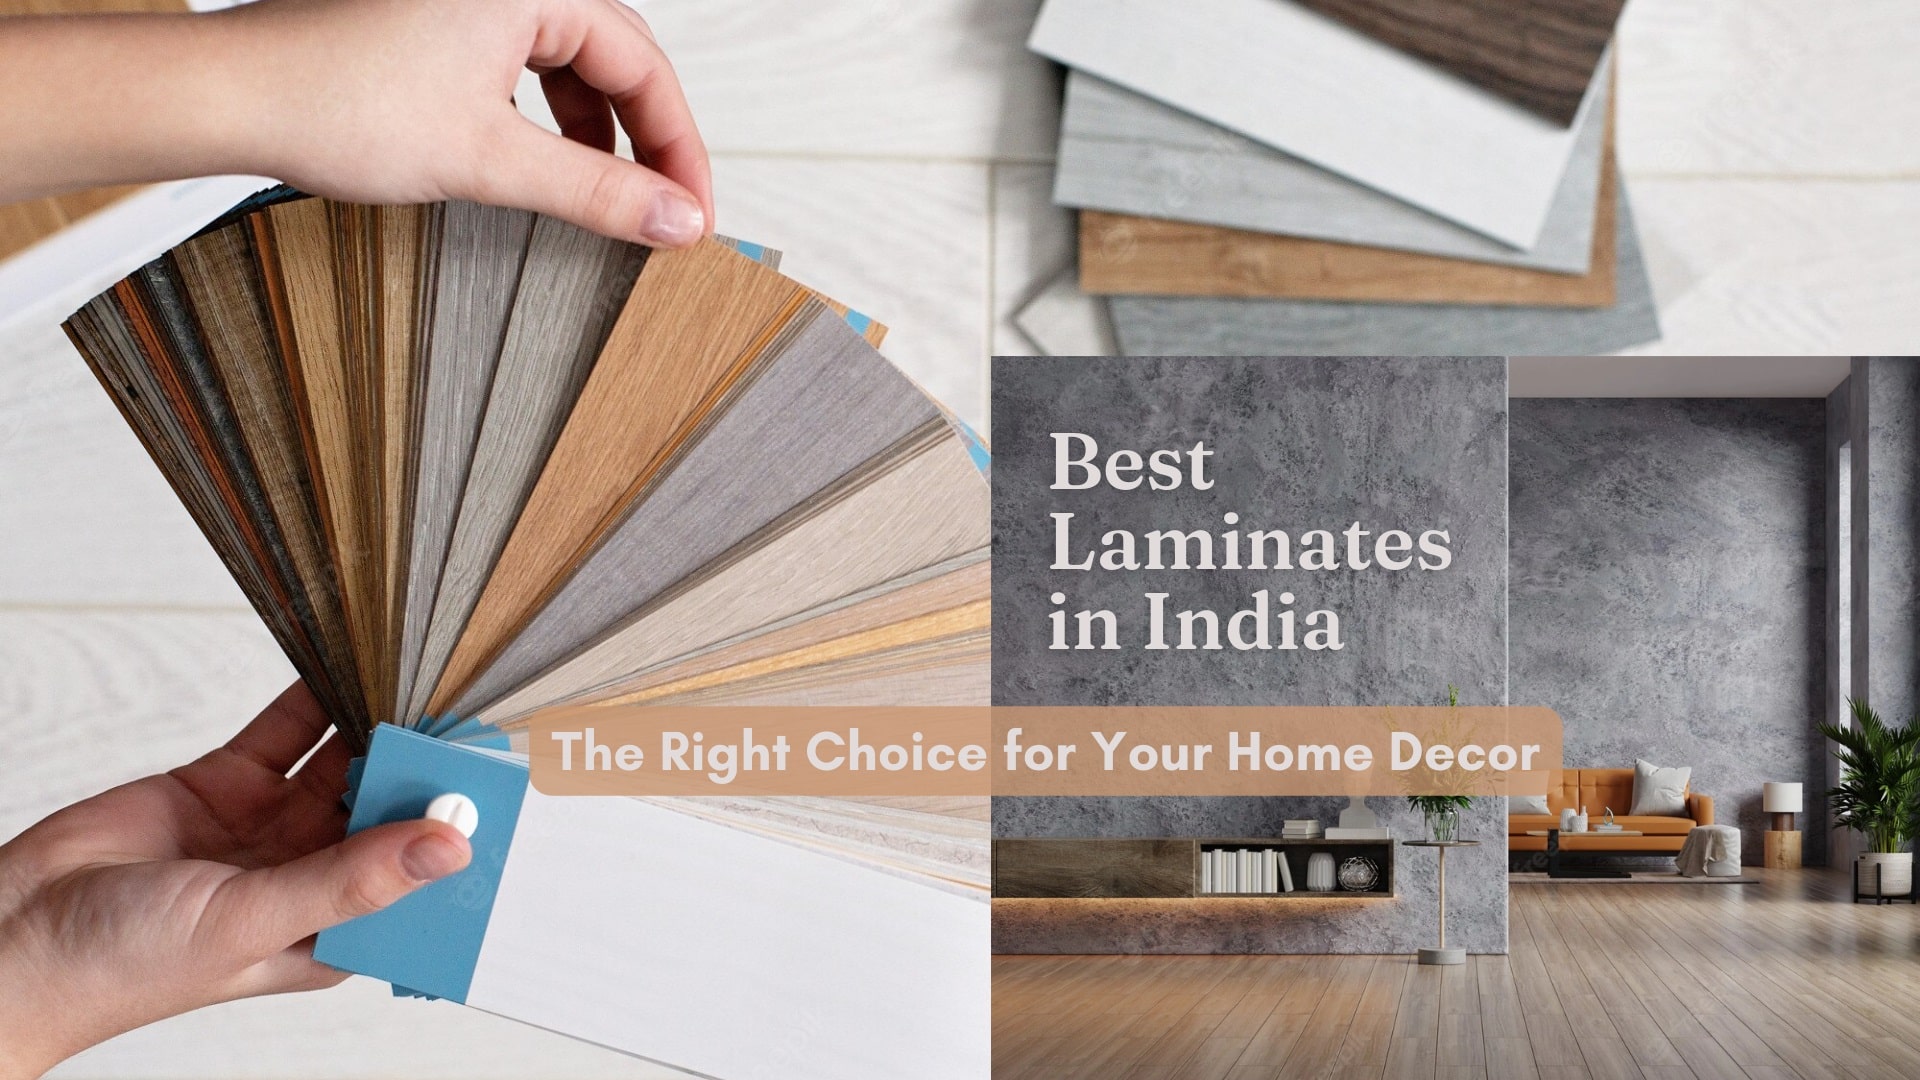 Best Laminates in India - The Right Choice for Your Home Decor